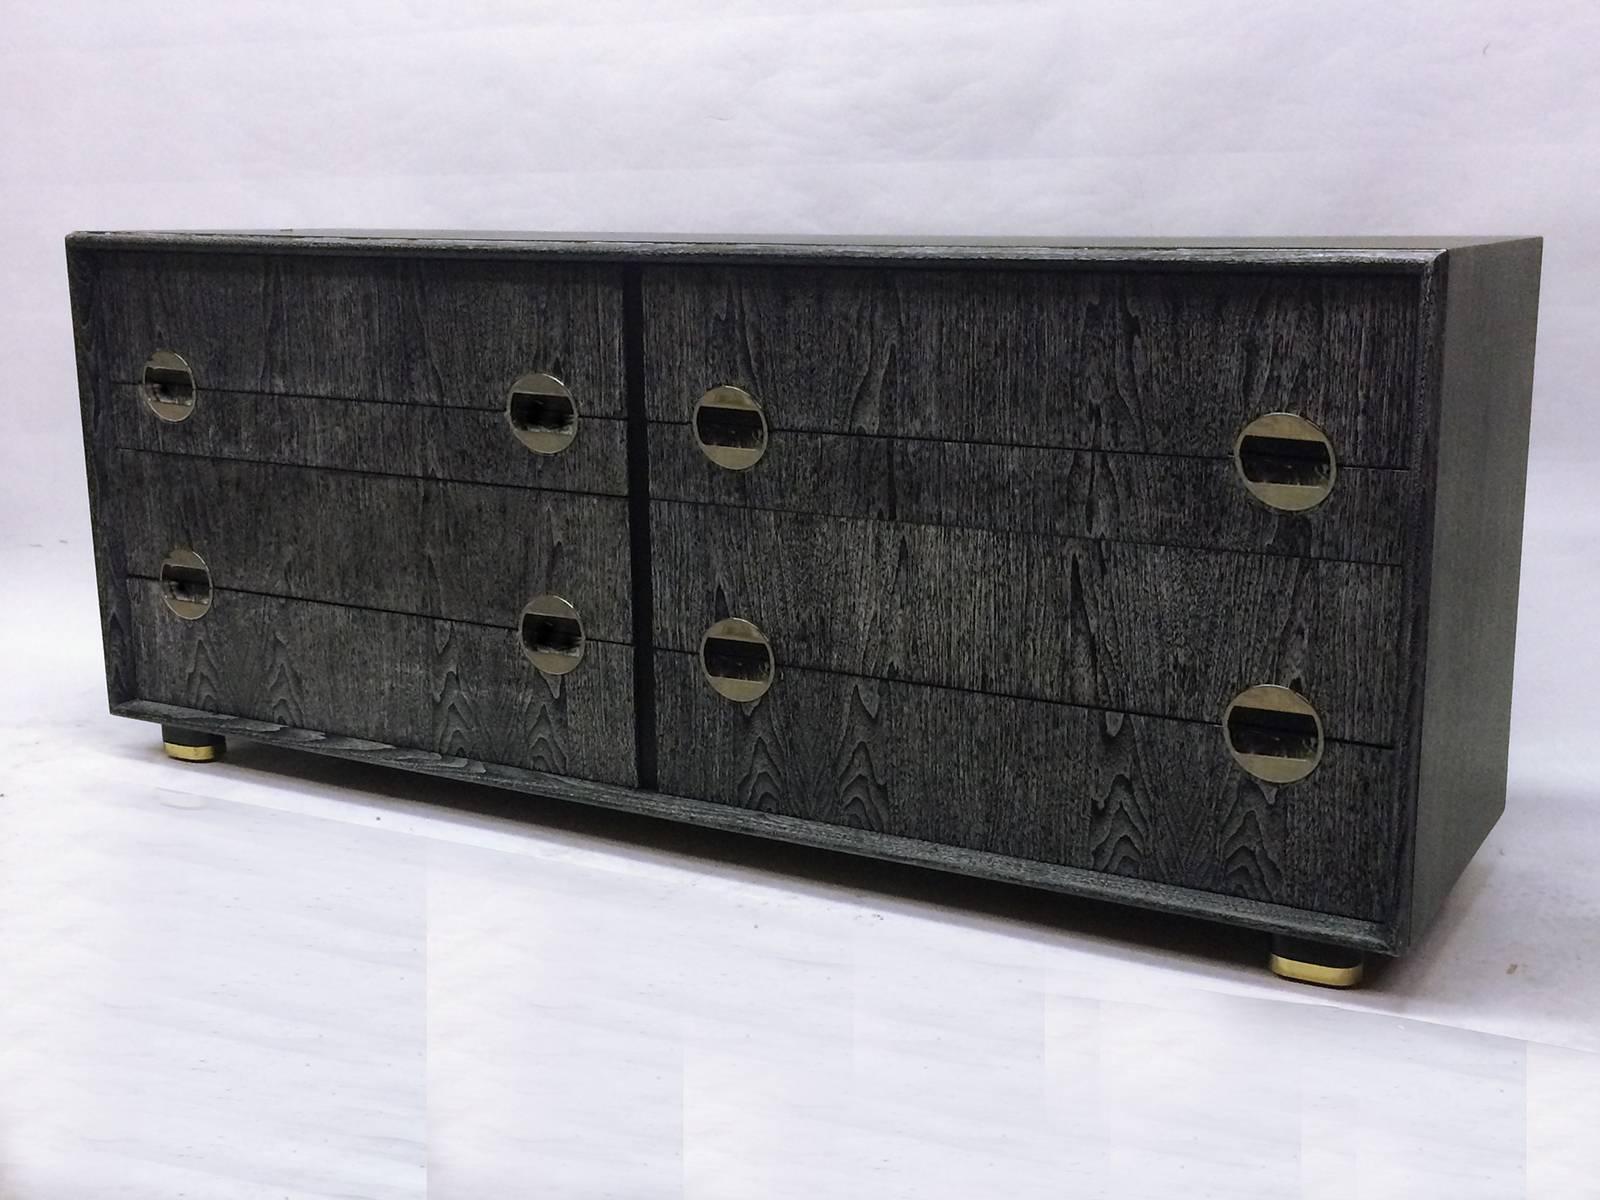 This is a cerused chest of drawers by Johnson furniture. Chest has original labels and features unique chromed handles, nine drawers and four brass capped legs.